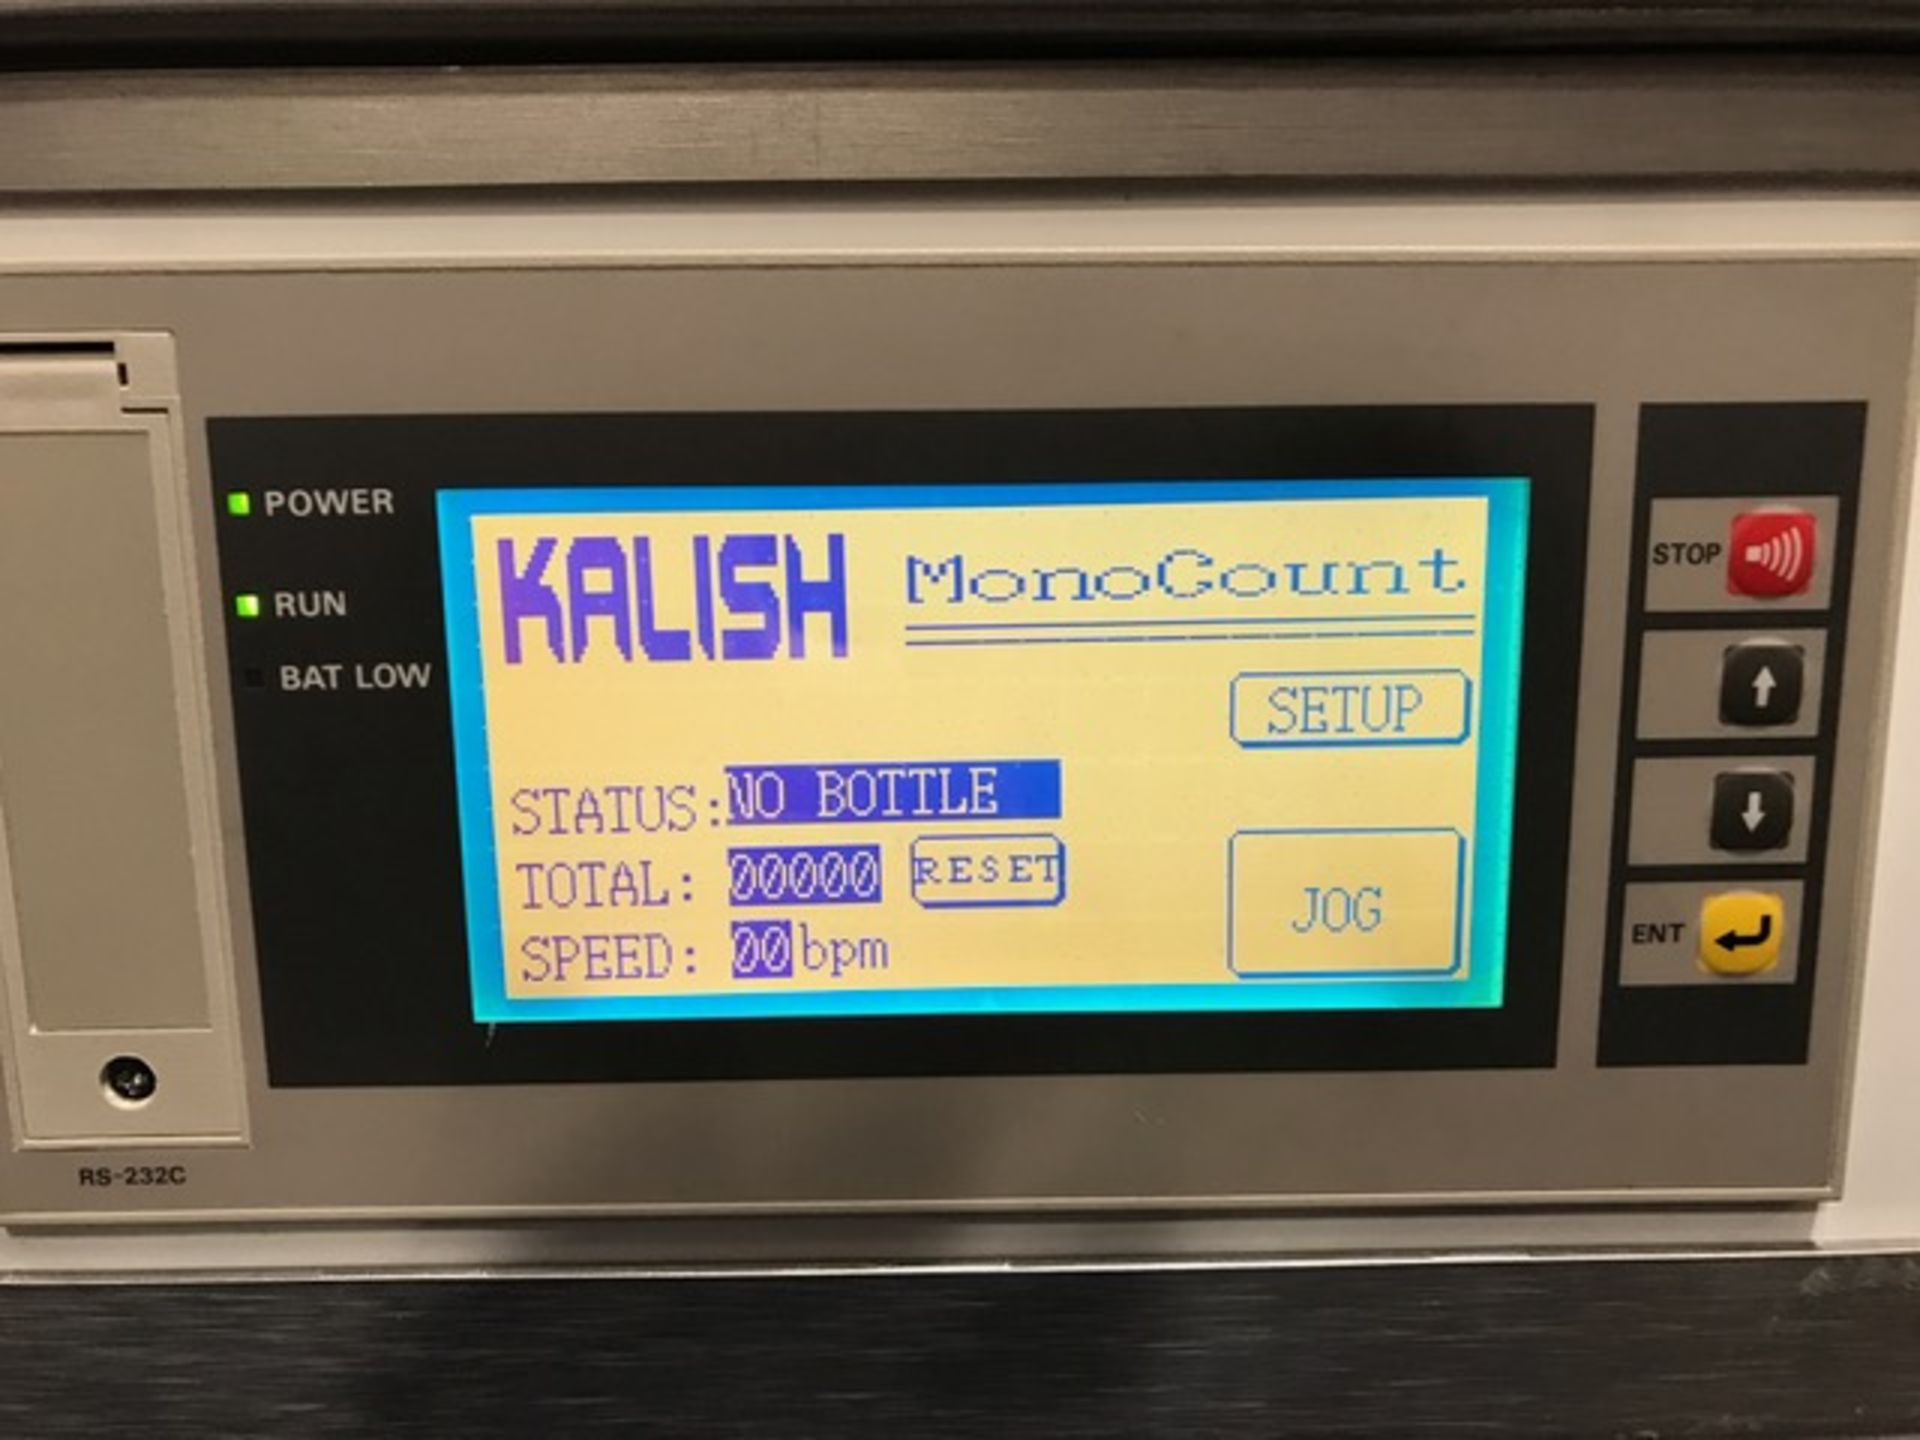 Kalish Monoblock Packaging Line for Tablets and Capsules - Image 4 of 13